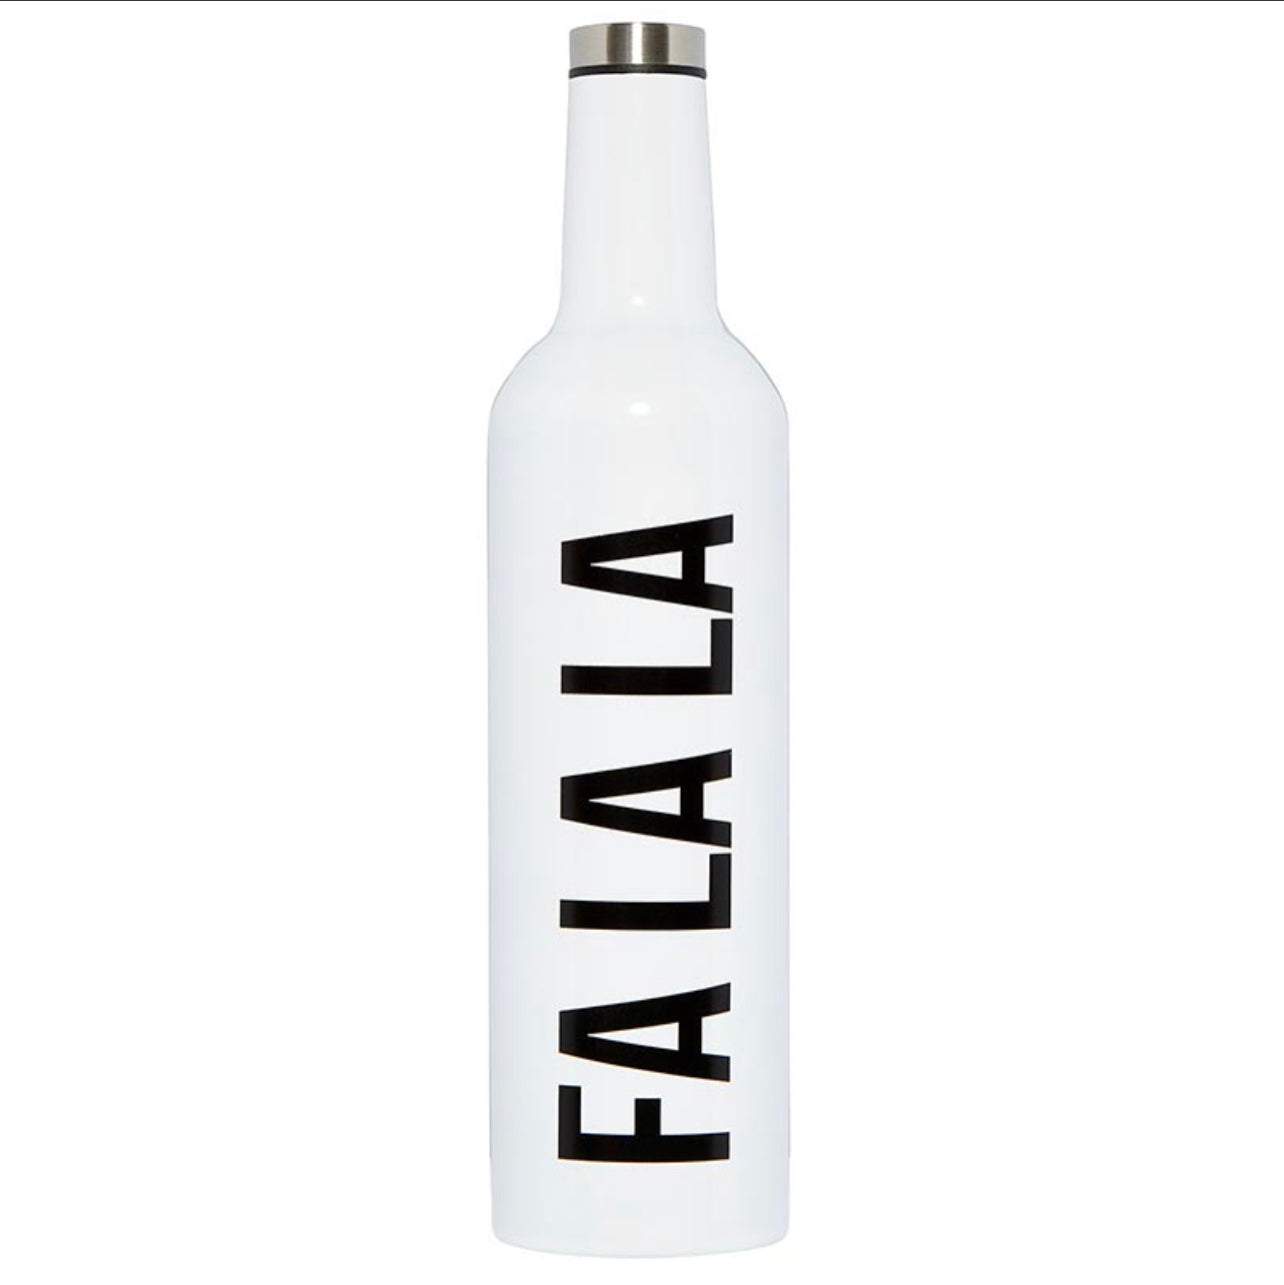 white stainless steel wine bottle with words in black that say "fa la la"